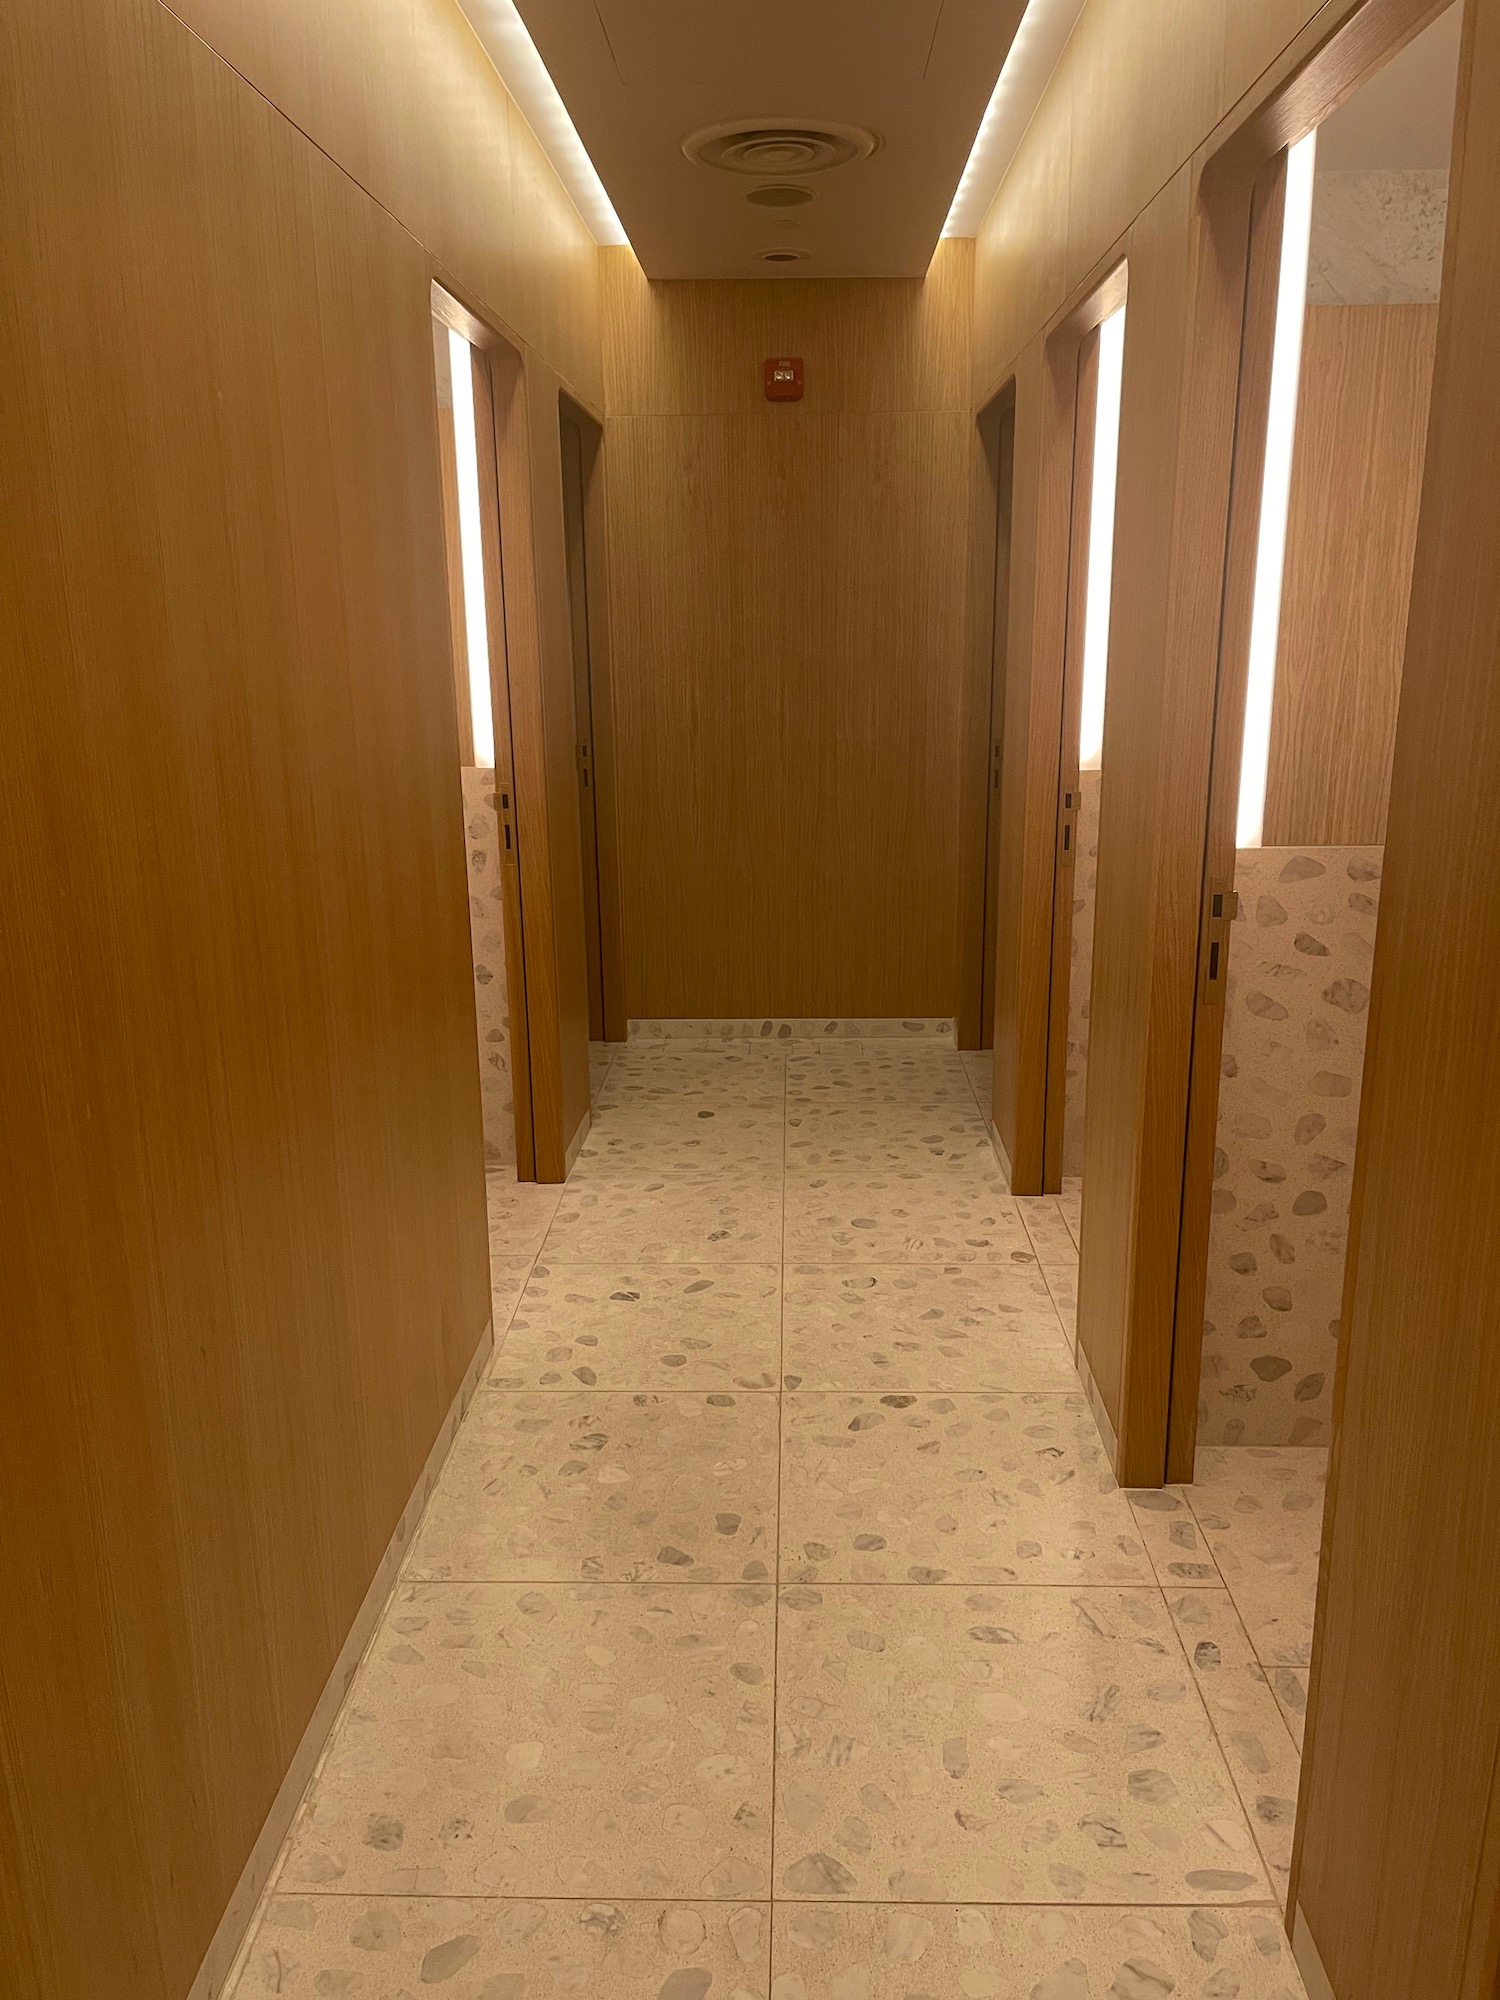 a hallway with doors and a light on the ceiling